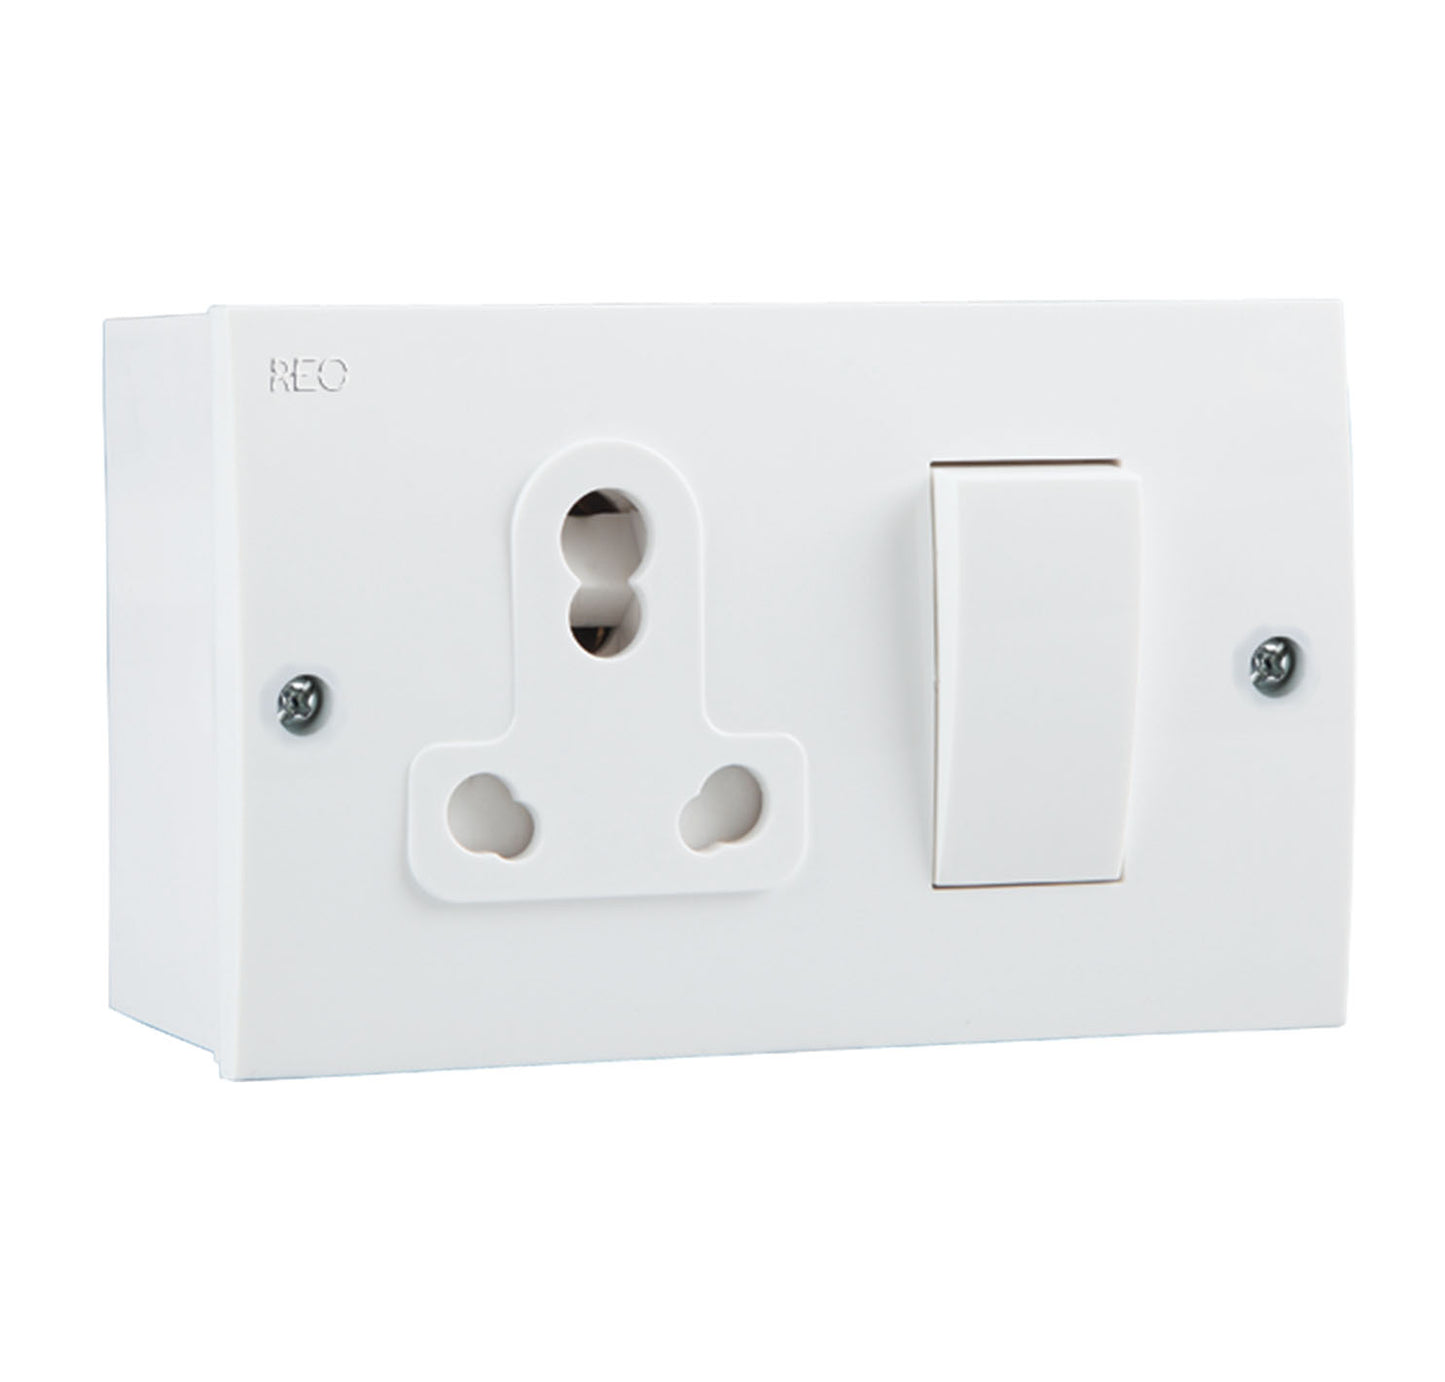 Havells Reo Flair Switch Socket Combined with Box - 16 Amps